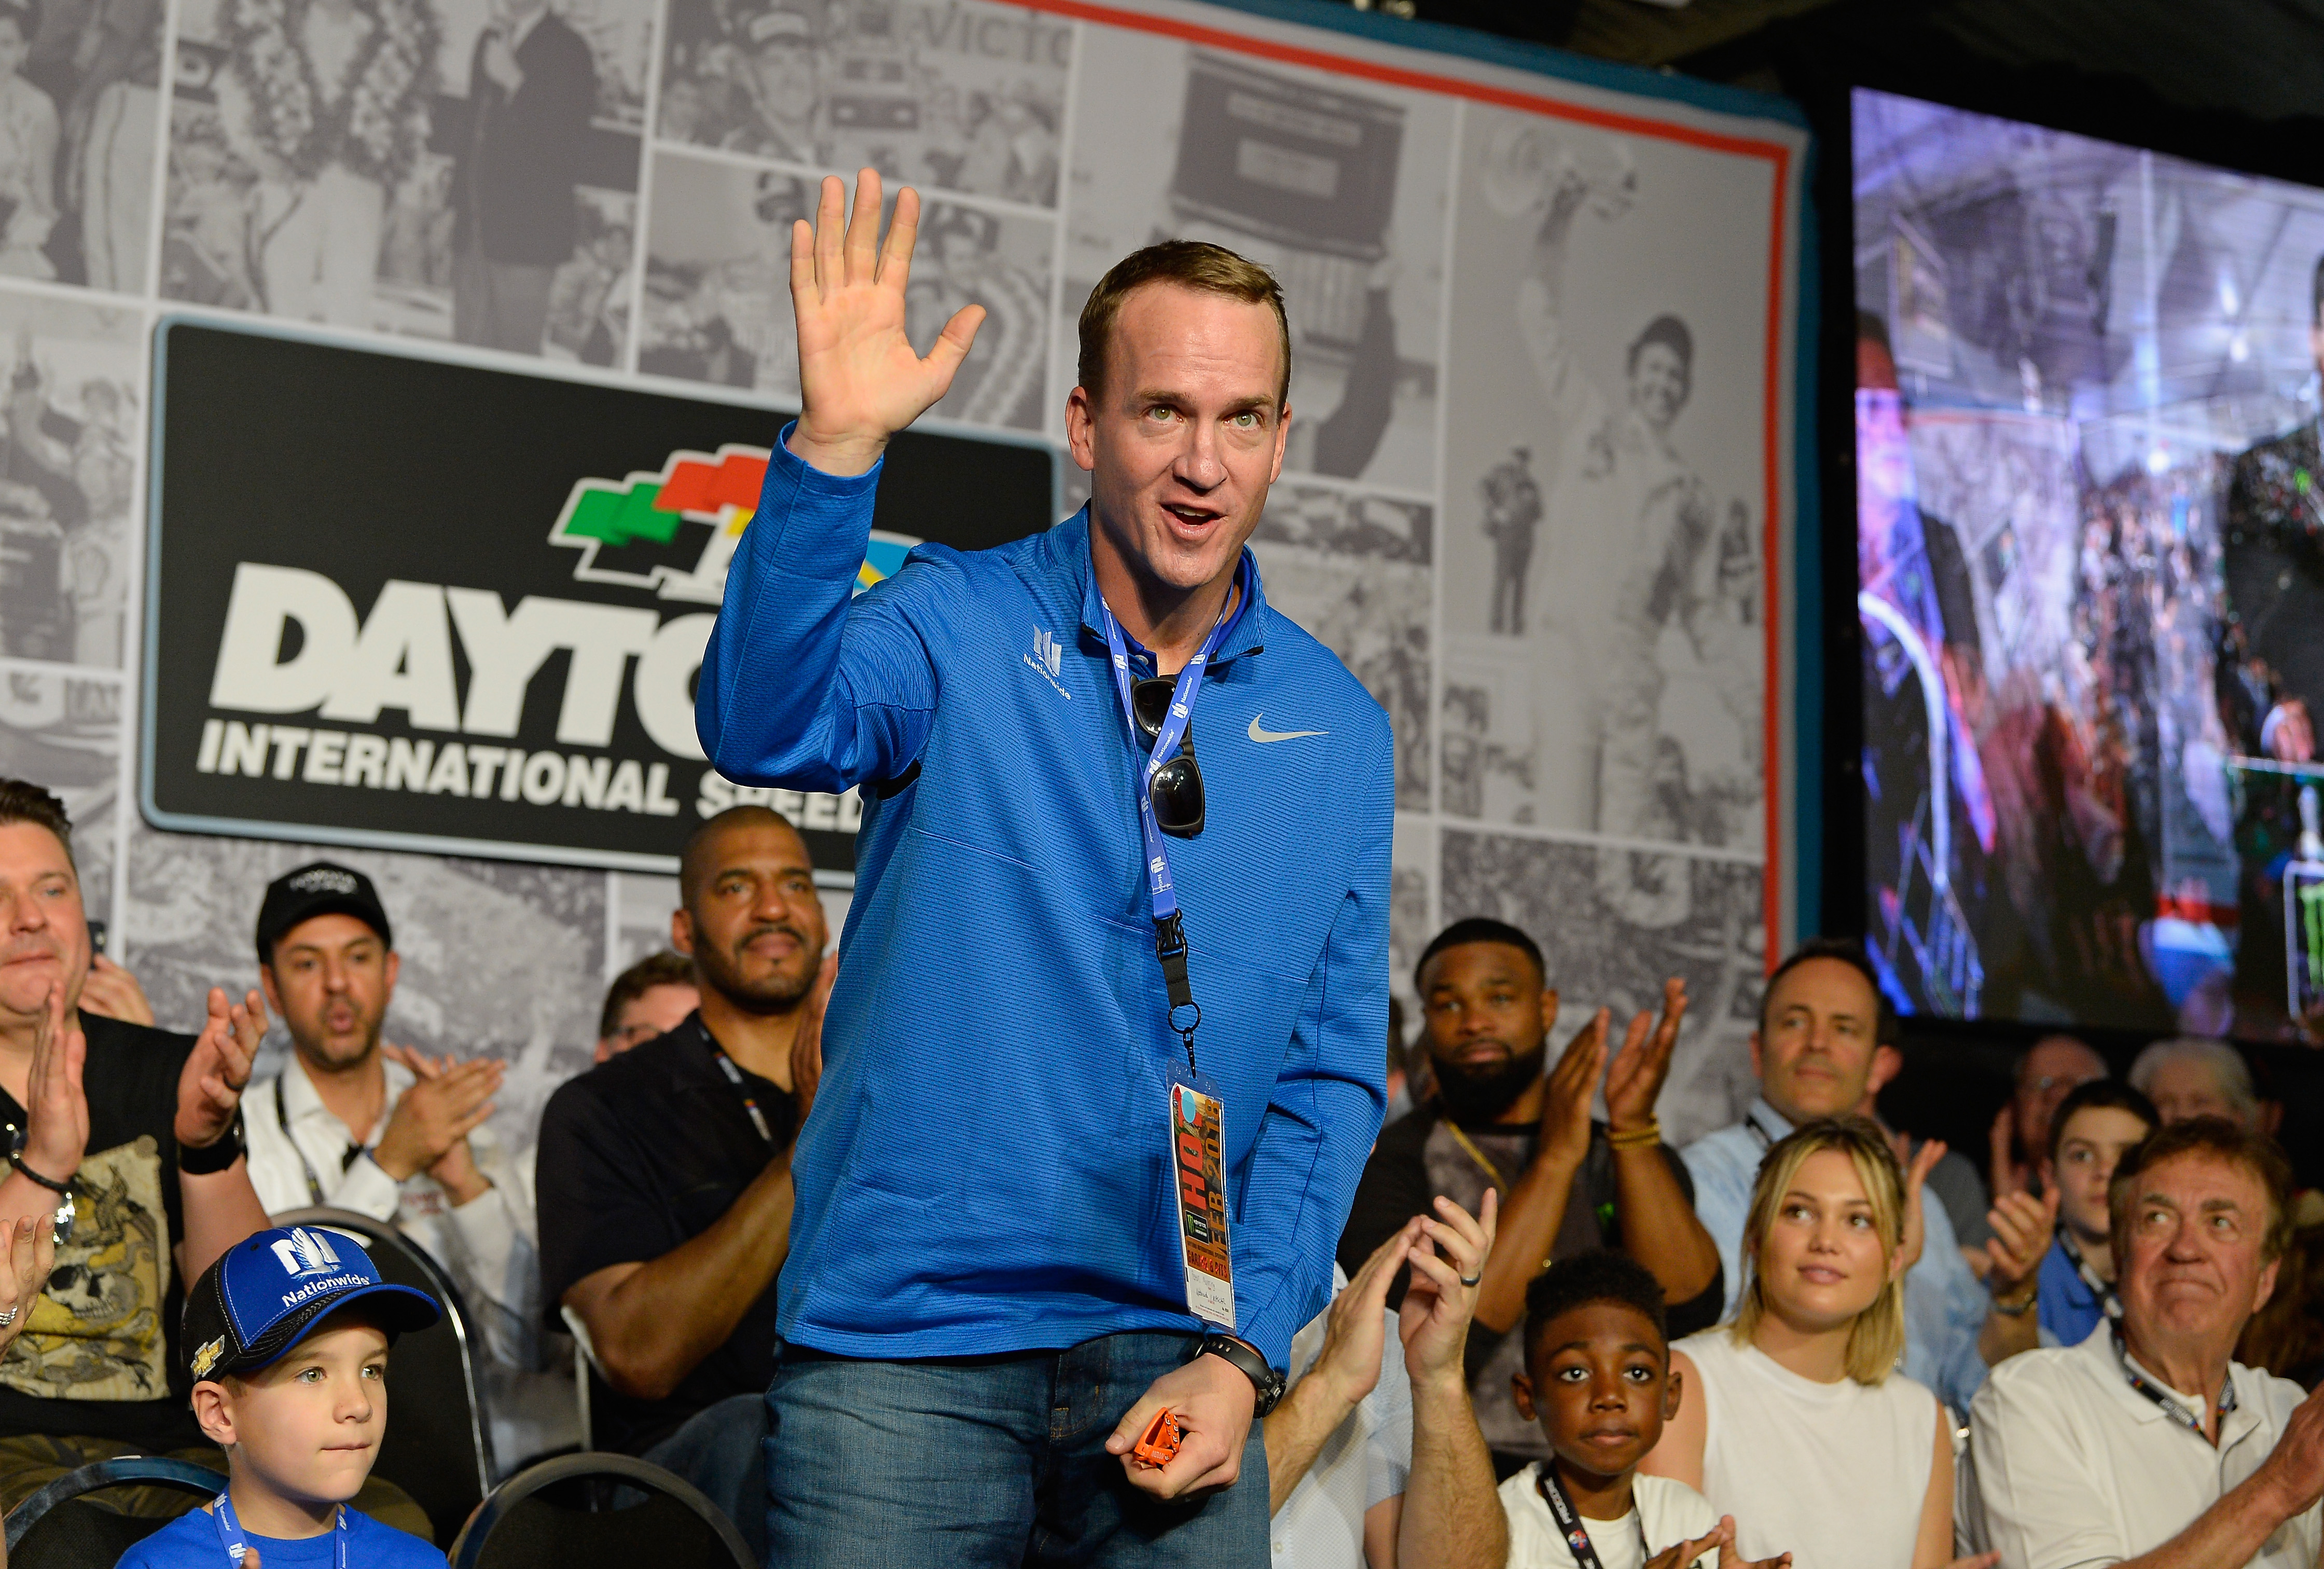 Peyton Manning waves to the crowd during the drivers meeting for the Monster Energy NASCAR Cup Series 60th Annual Daytona 500 at Daytona International Speedway on February 18, 2018 in Daytona Beach, Florida.  (Photo by Robert Laberge/Getty Images)